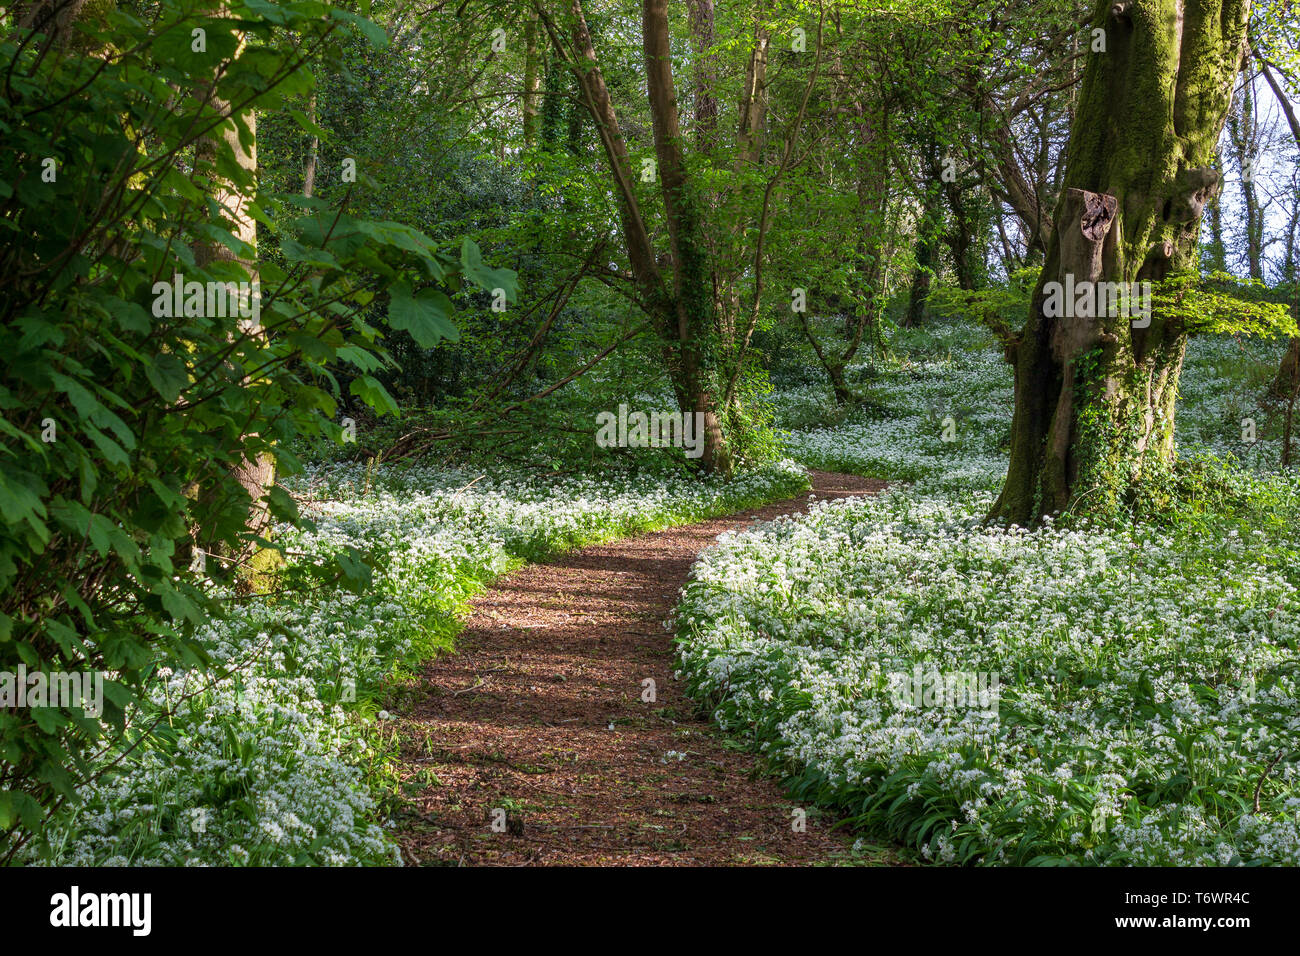 Woodland Path with Wild Garlic in Full Bloom in Evening Sunlight Stock Photo